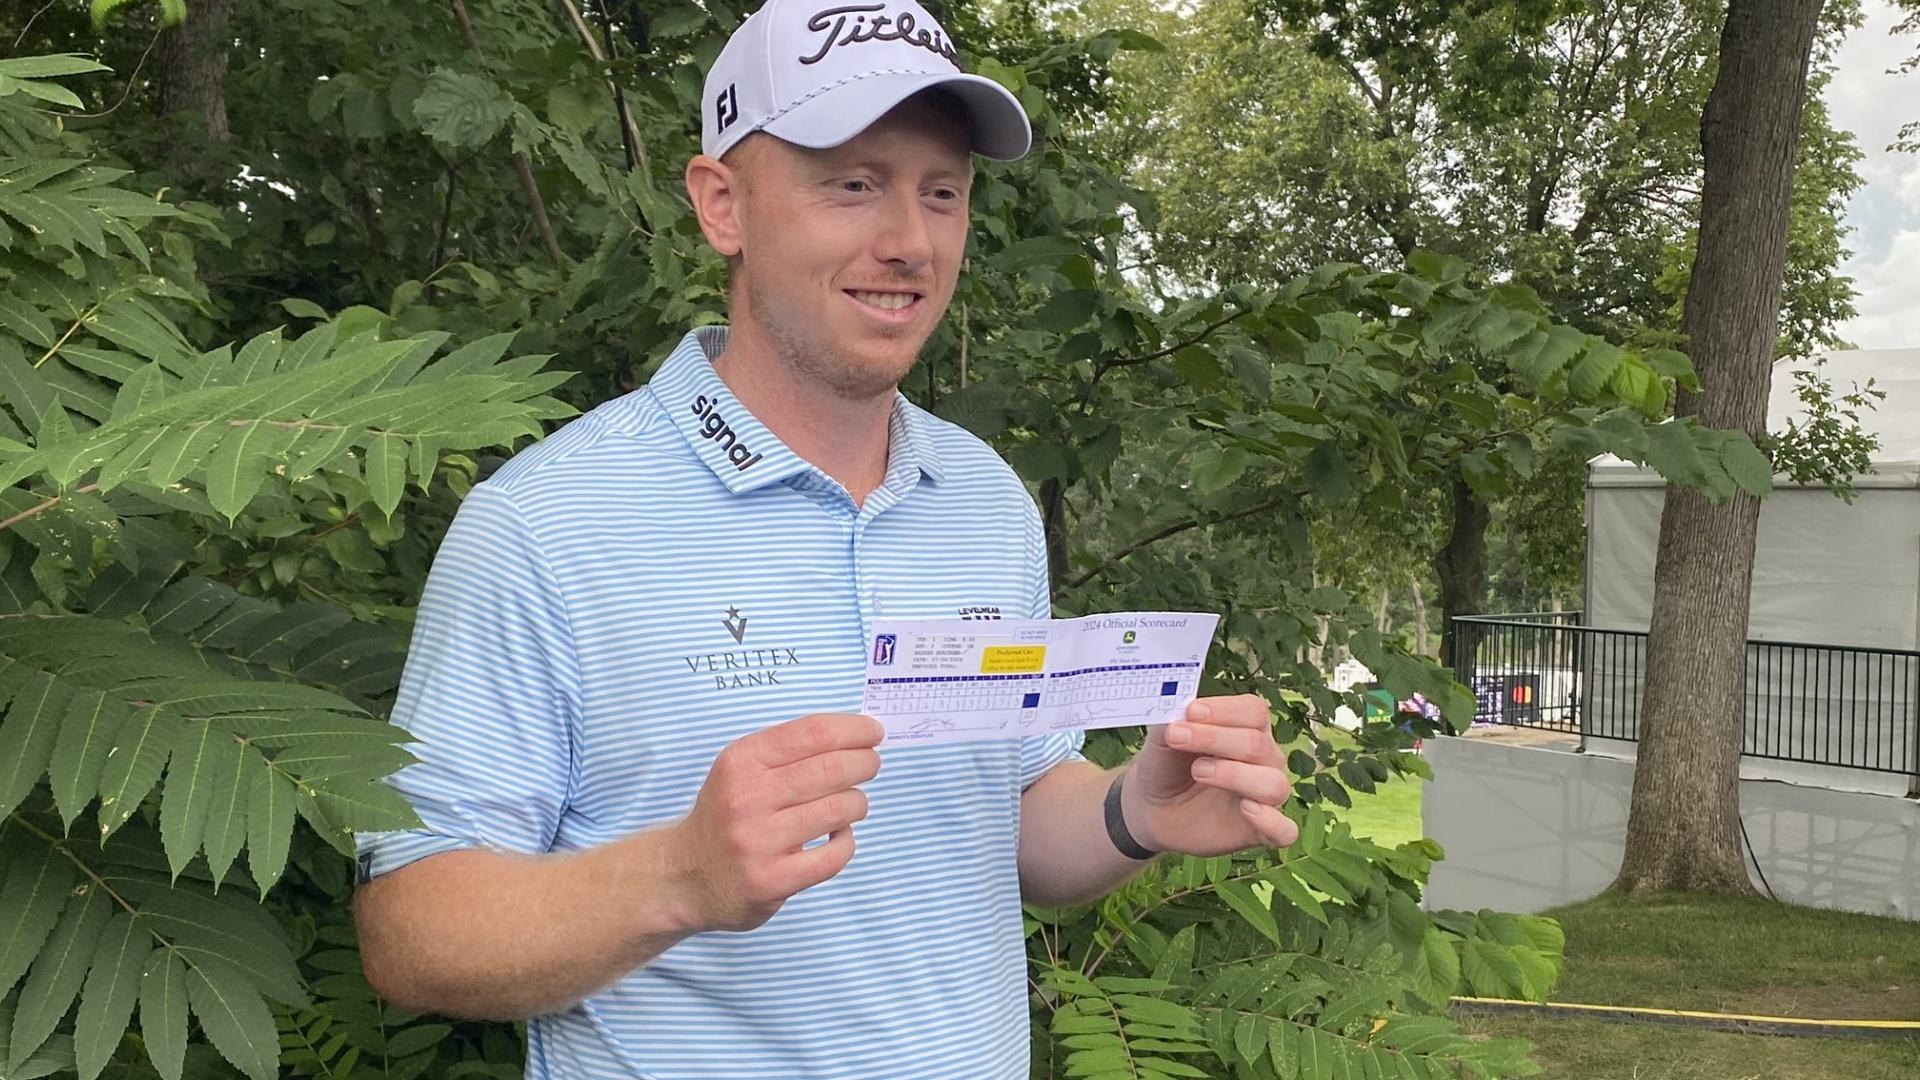 News 8's Matt Randazzo sat down with Tom Johnston with the Dispatch-Argus to talk about Hayden Springer's historic run in the John Deere Classic.